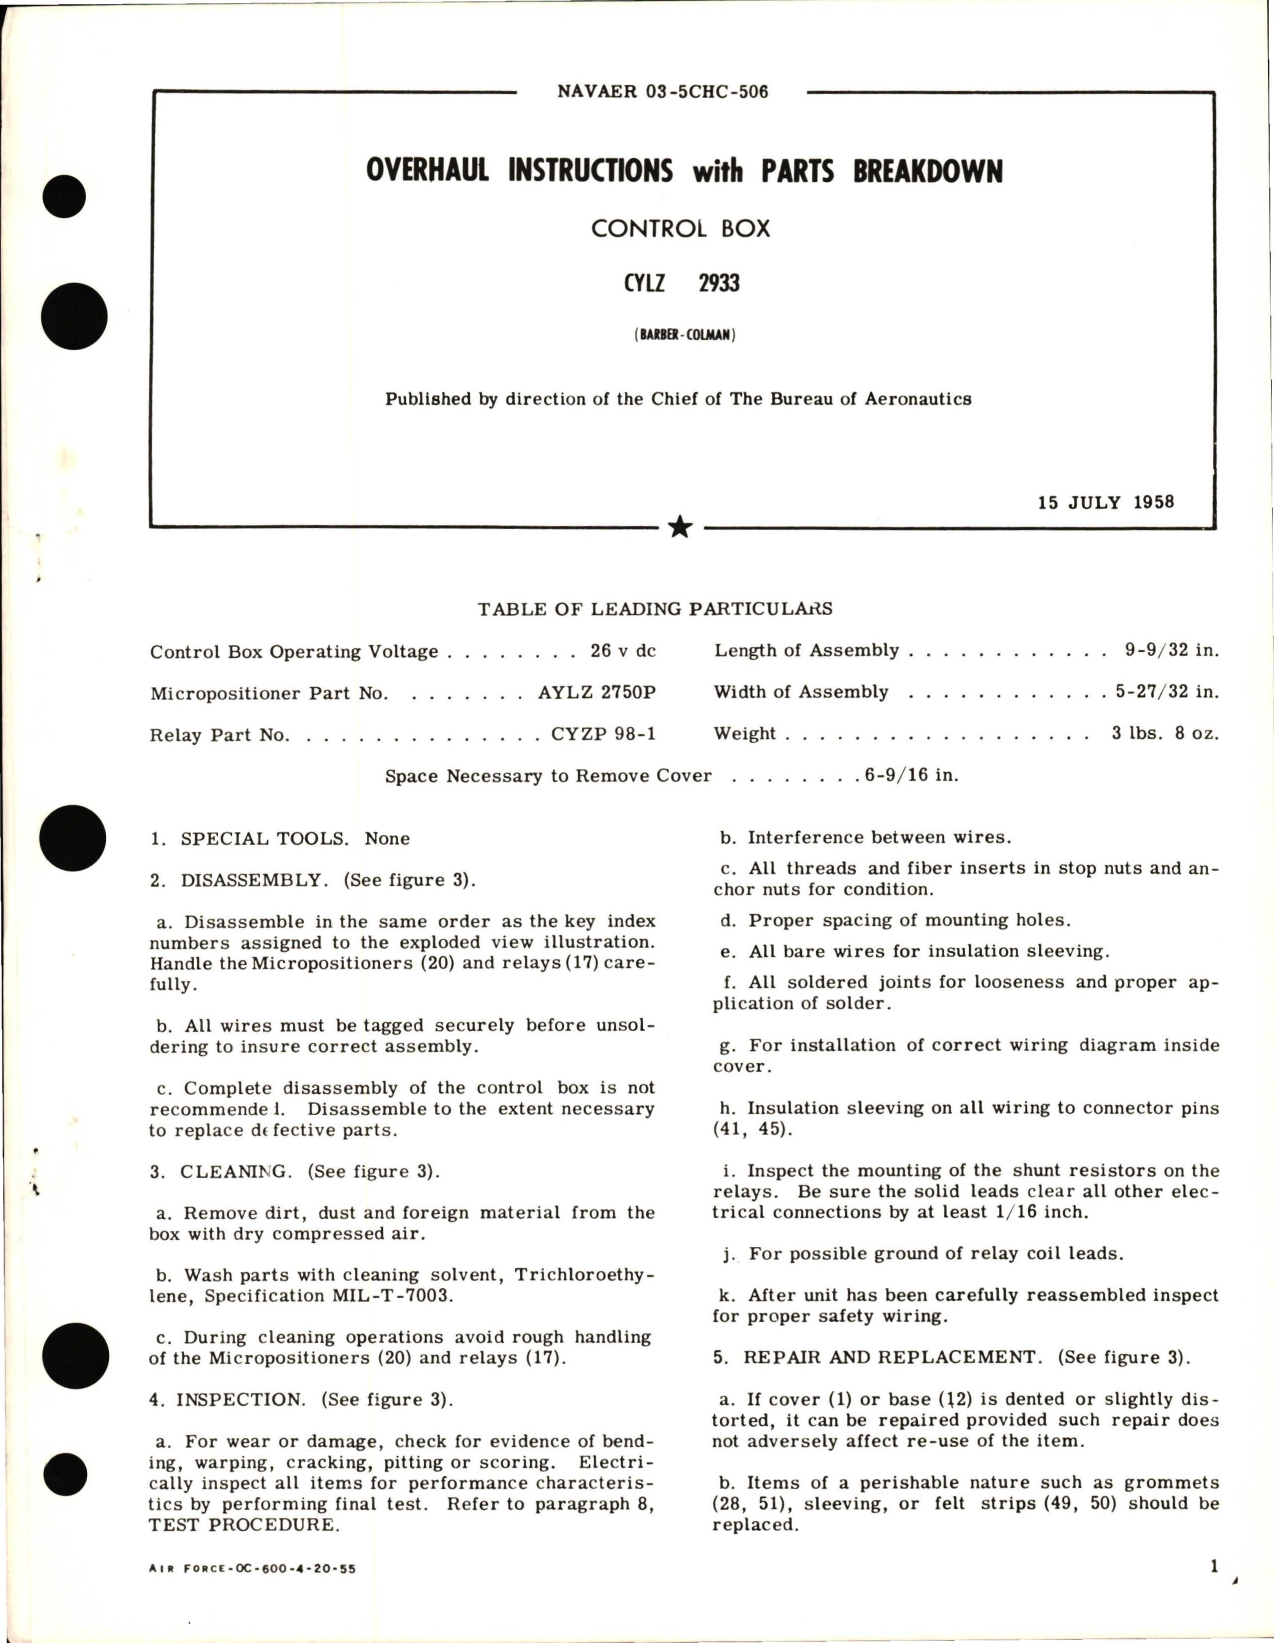 Sample page 1 from AirCorps Library document: Overhaul Instructions with Parts Breakdown for Control Box - CYLZ 2933 